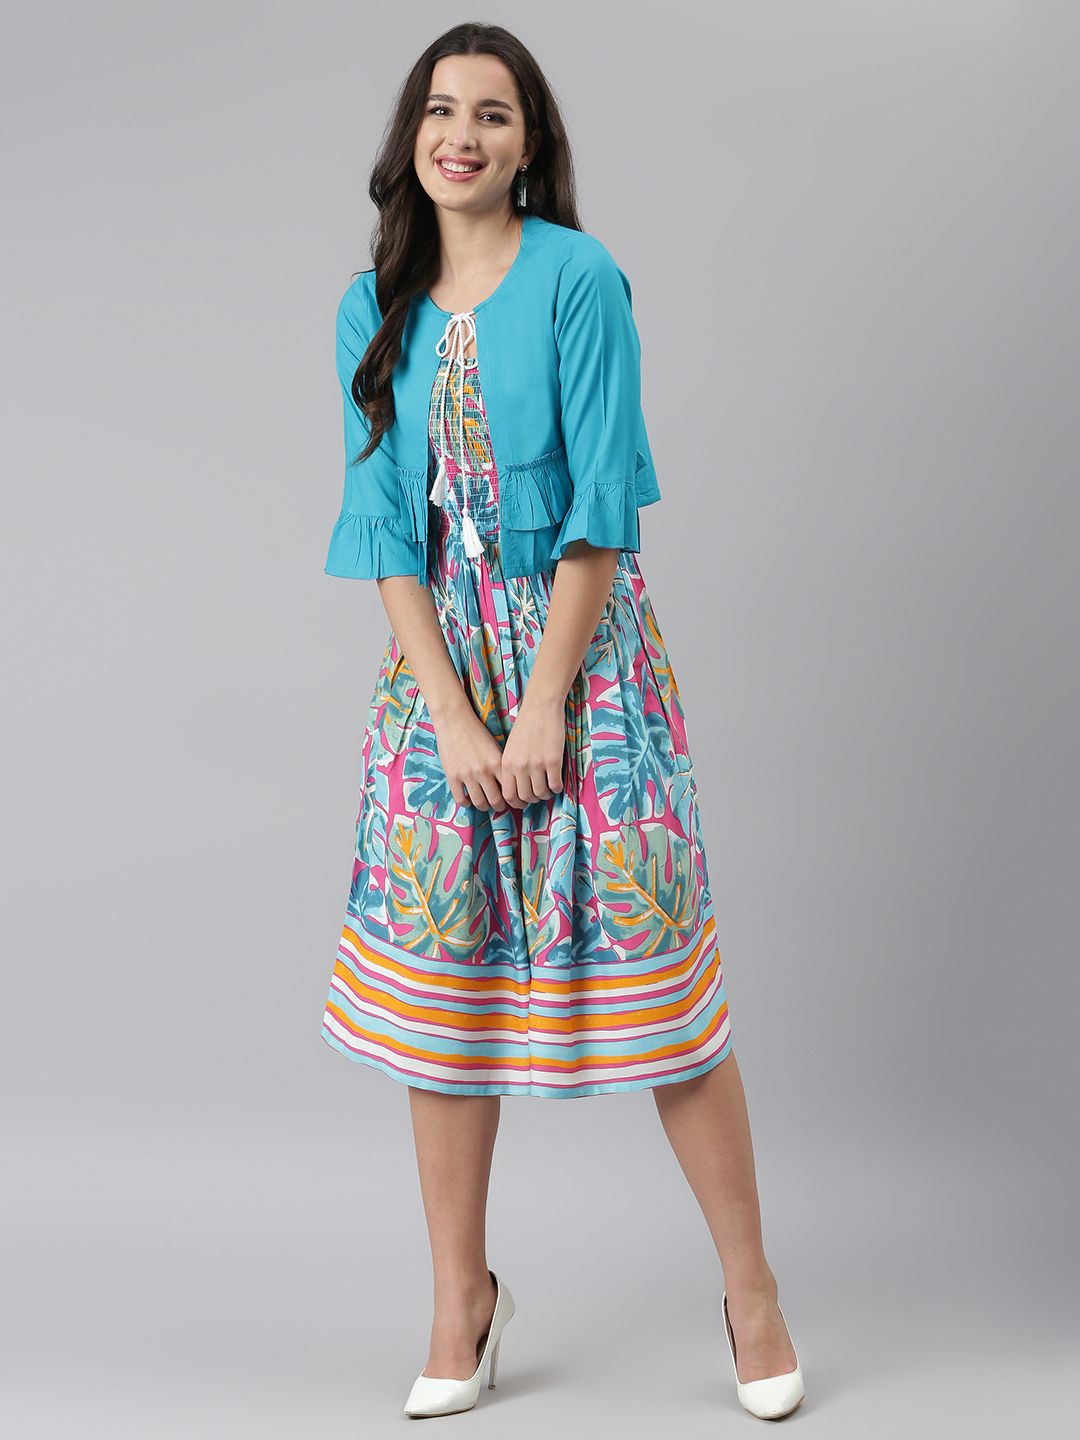 DEEBACO Turquoise Blue Tropical Printed Smocked Fit & Flare Dress With Shrug Price in India